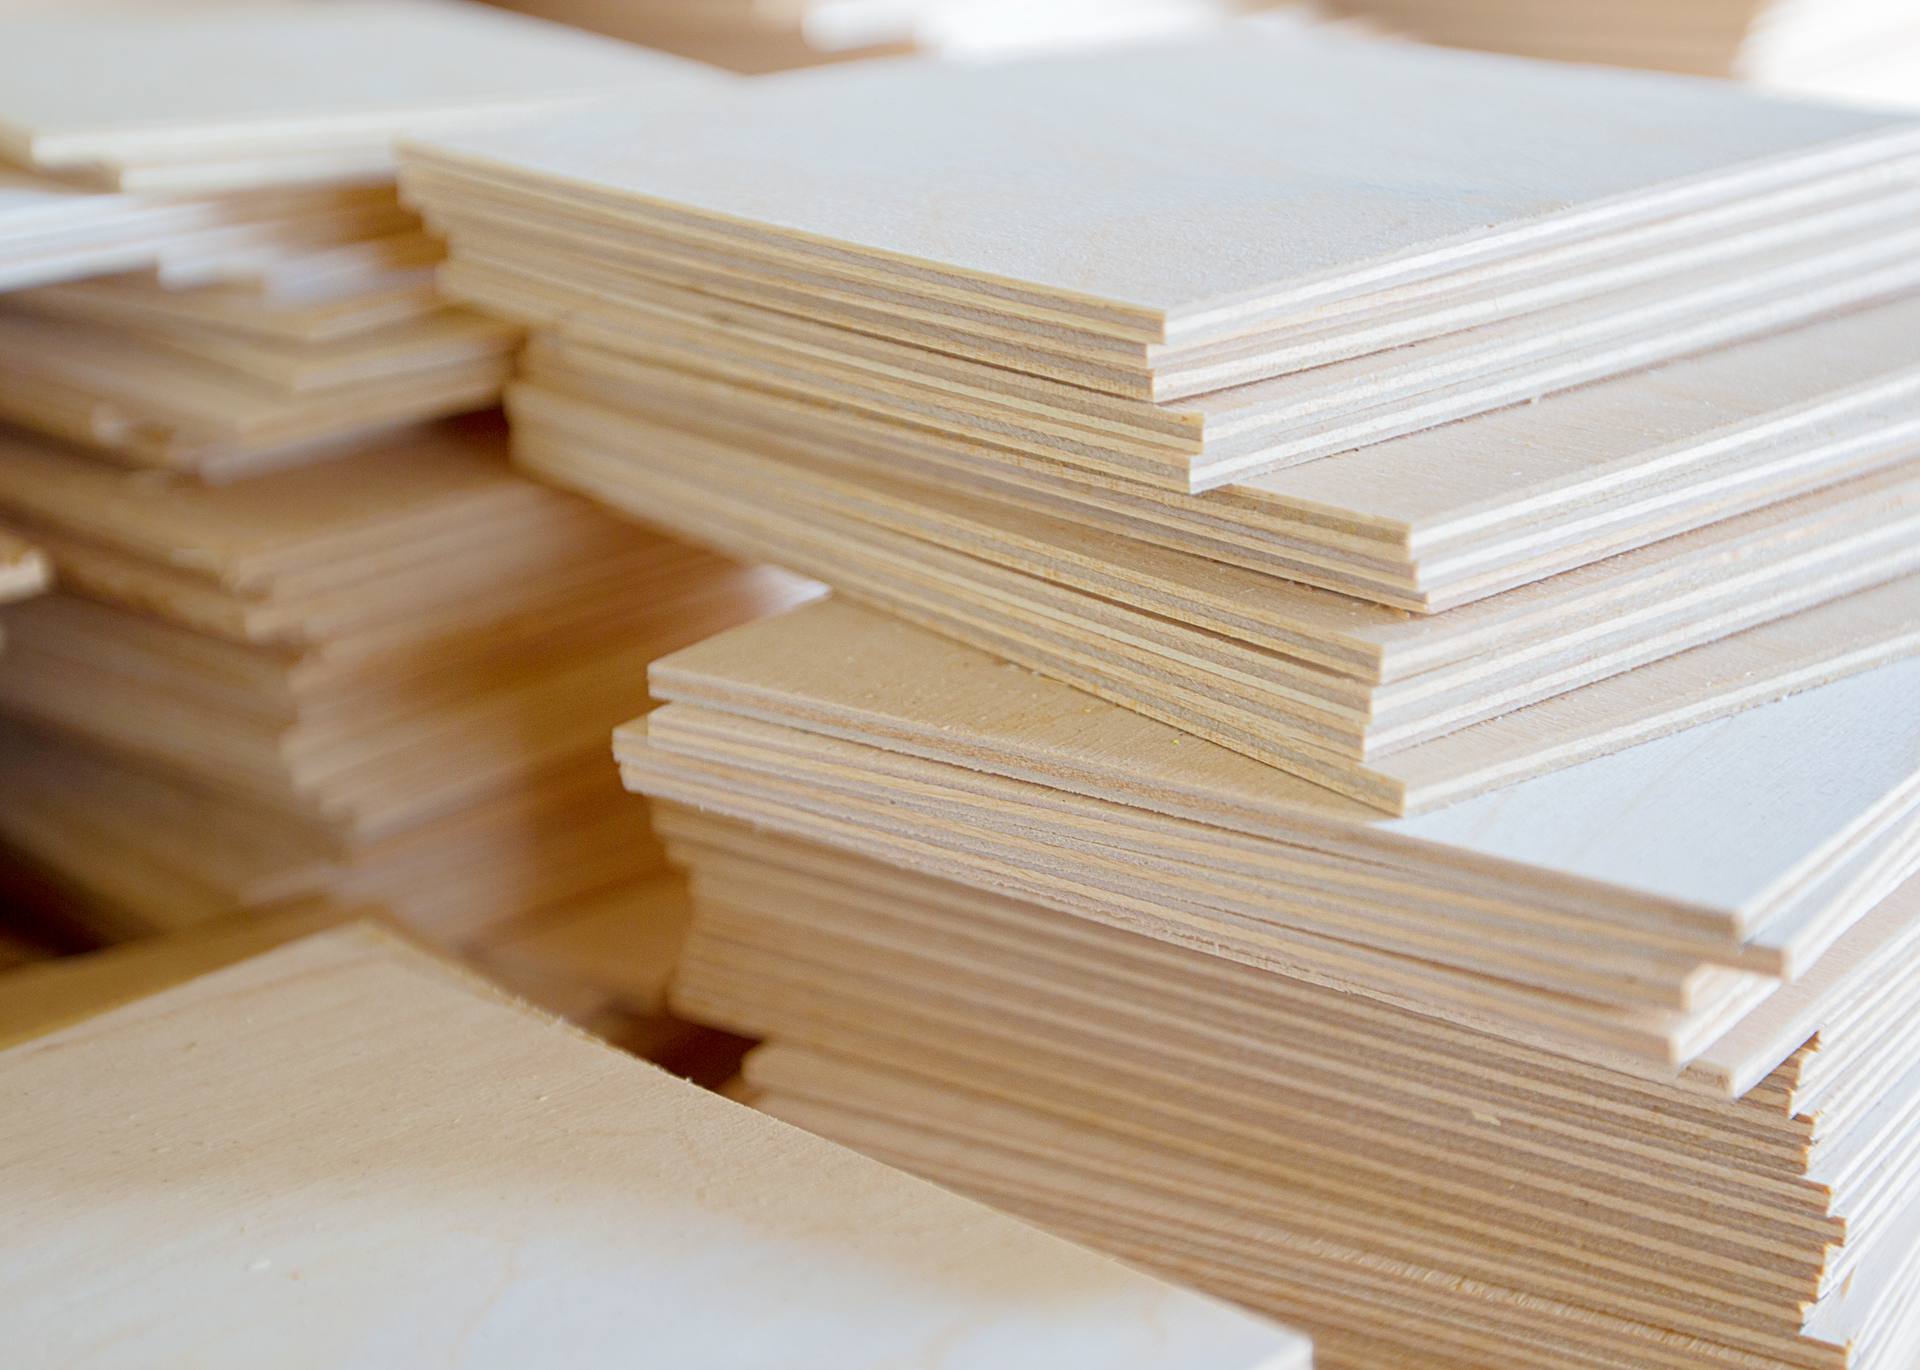 wood-plywood-preparations-manufacture-furniture_副本